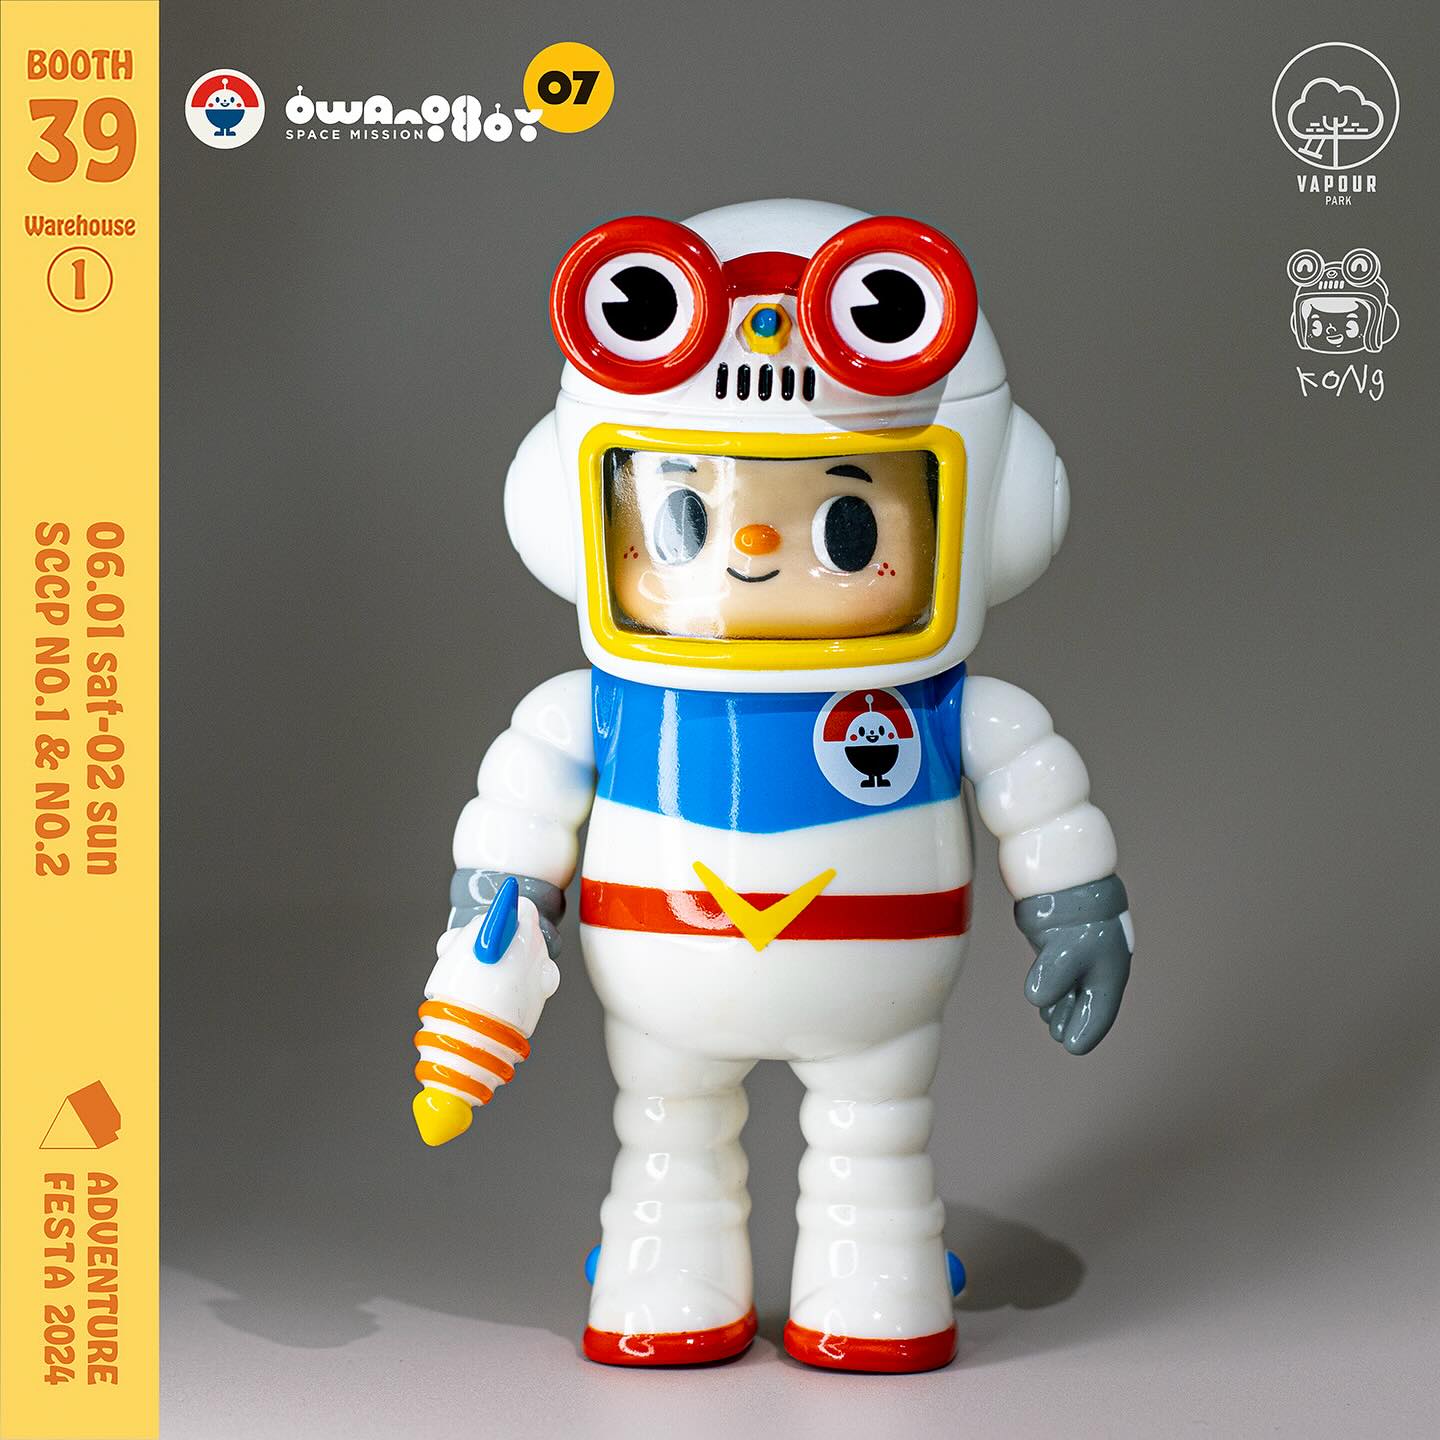 Owangeboy - Space Mission : 07 - SpaceX-7 by Kong Andri & Vapourpark - Preorder